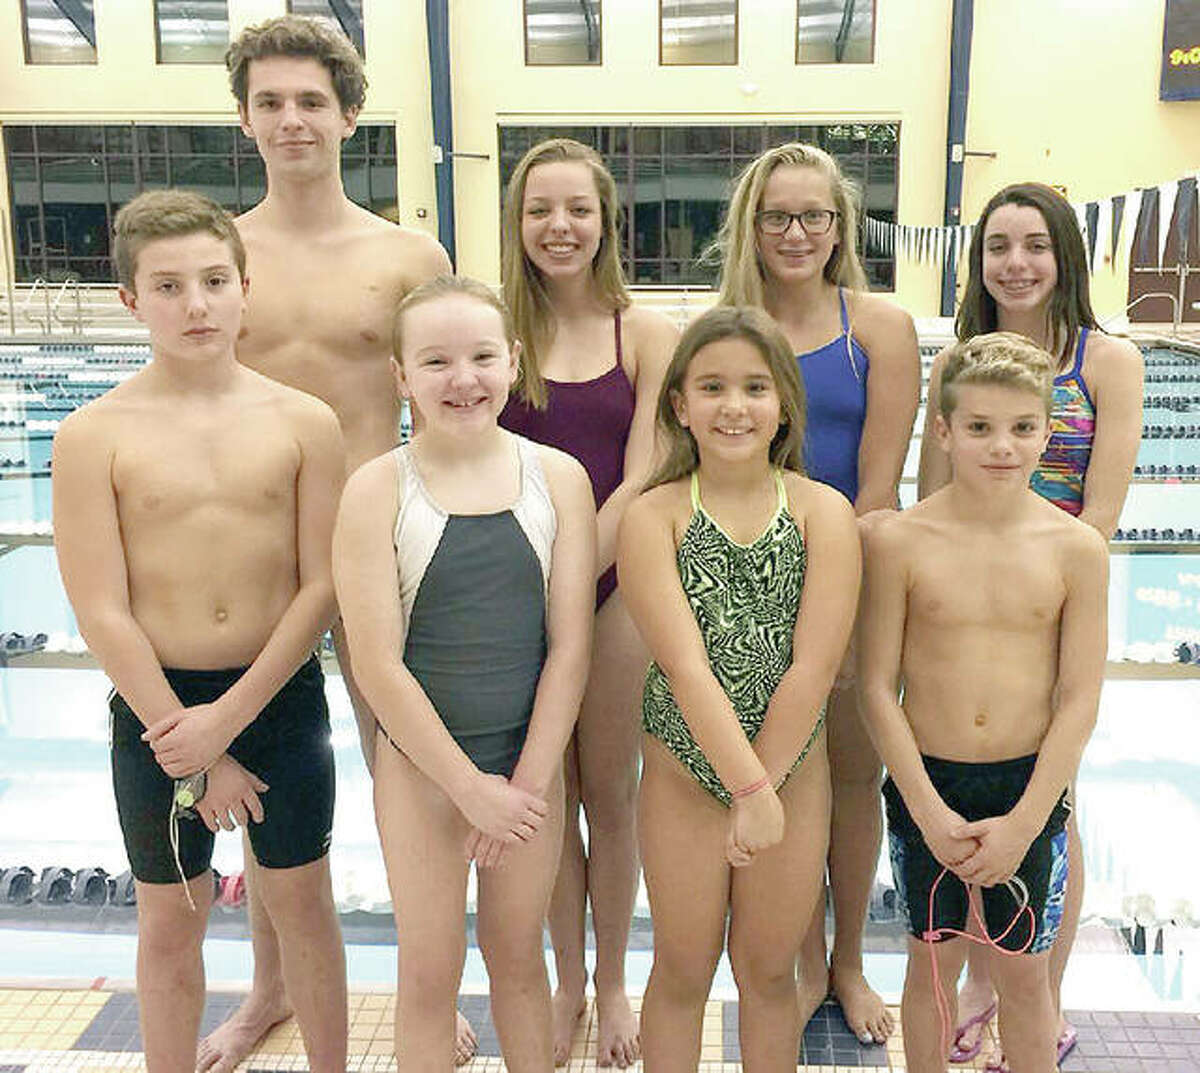 Tri-City Area Tidalwaves swimmers who placed in the top three of their age group at the recent TCAY All-Around Invitational at Principia included: Back, from left: Claire Pohlman, Anna Moehn and Ceci Parker. Front row from left: Christian Kotzamanis, Addison Kenney, Mia Lopez and Nathan Kotzamanis. Missing are Noah Clancy and Abby Powers.